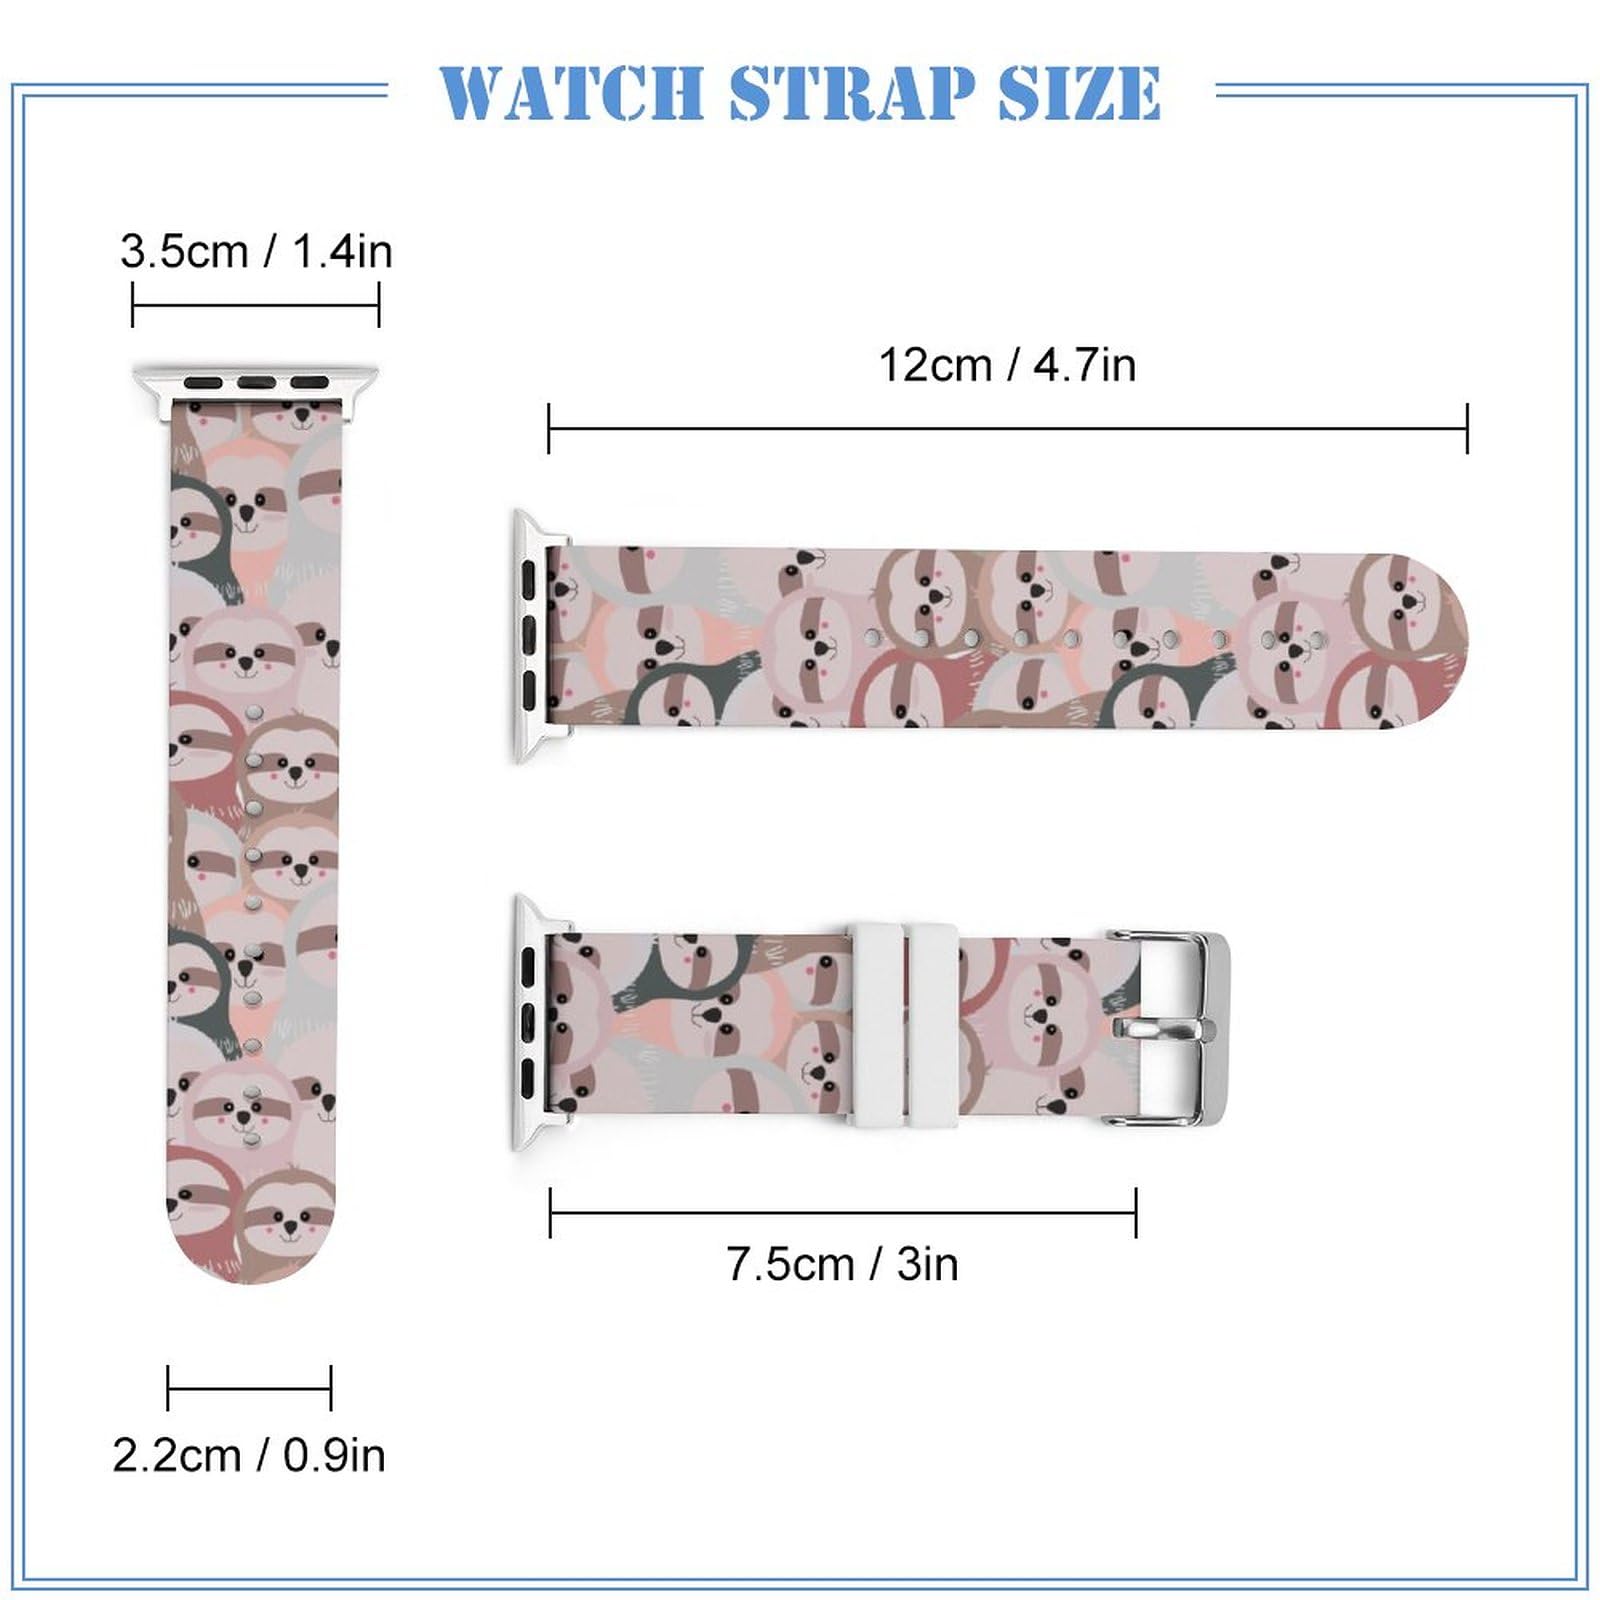 Cute Lovely Funny Sloth Silicone Strap Sports Watch Bands Soft Watch Replacement Strap for Women Men